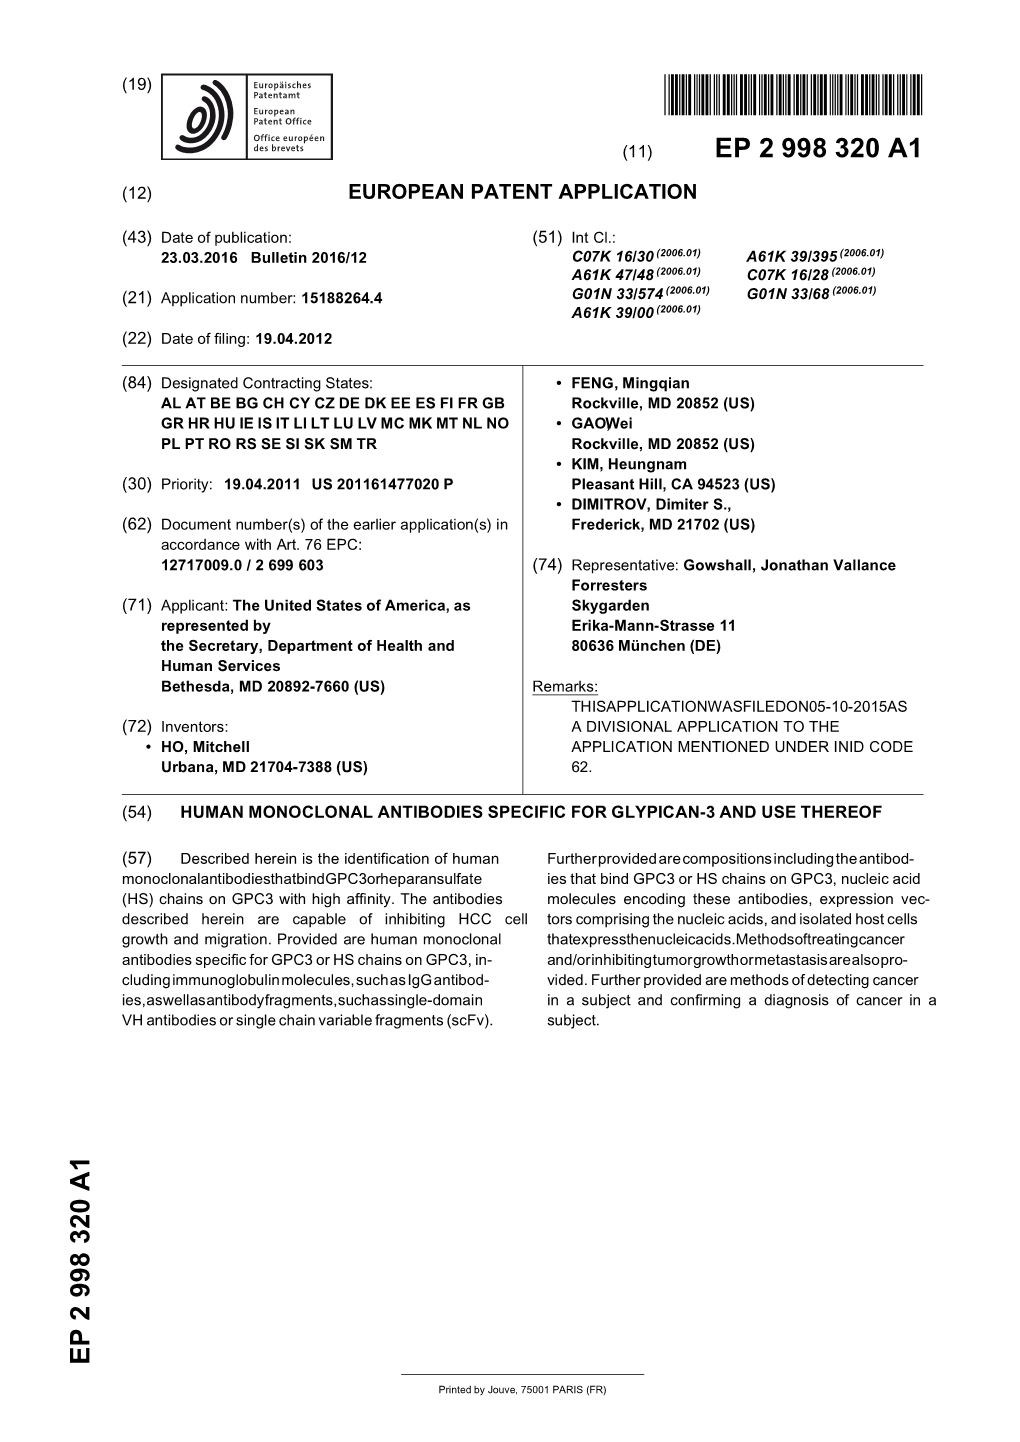 Human Monoclonal Antibodies Specific for Glypican-3 and Use Thereof